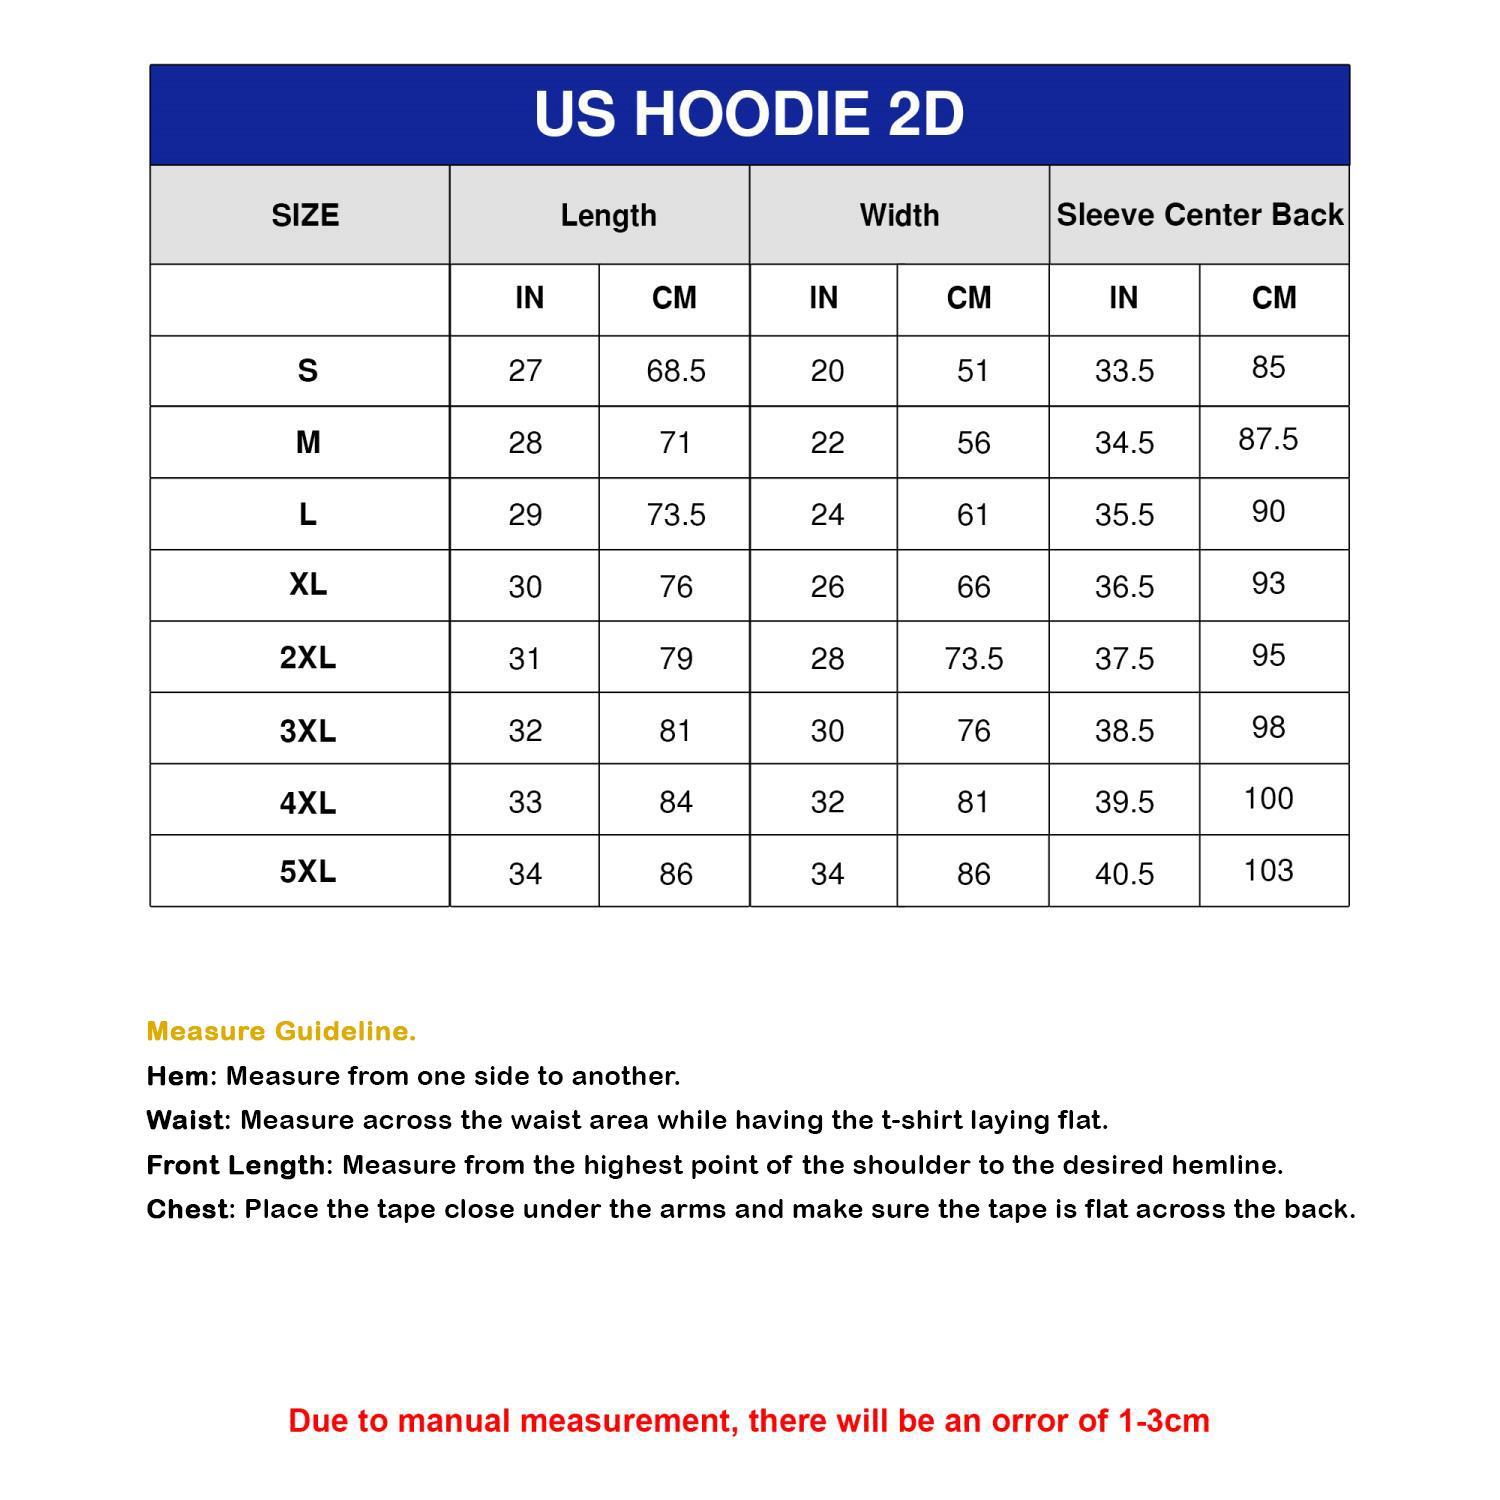 2d hoodie size chart